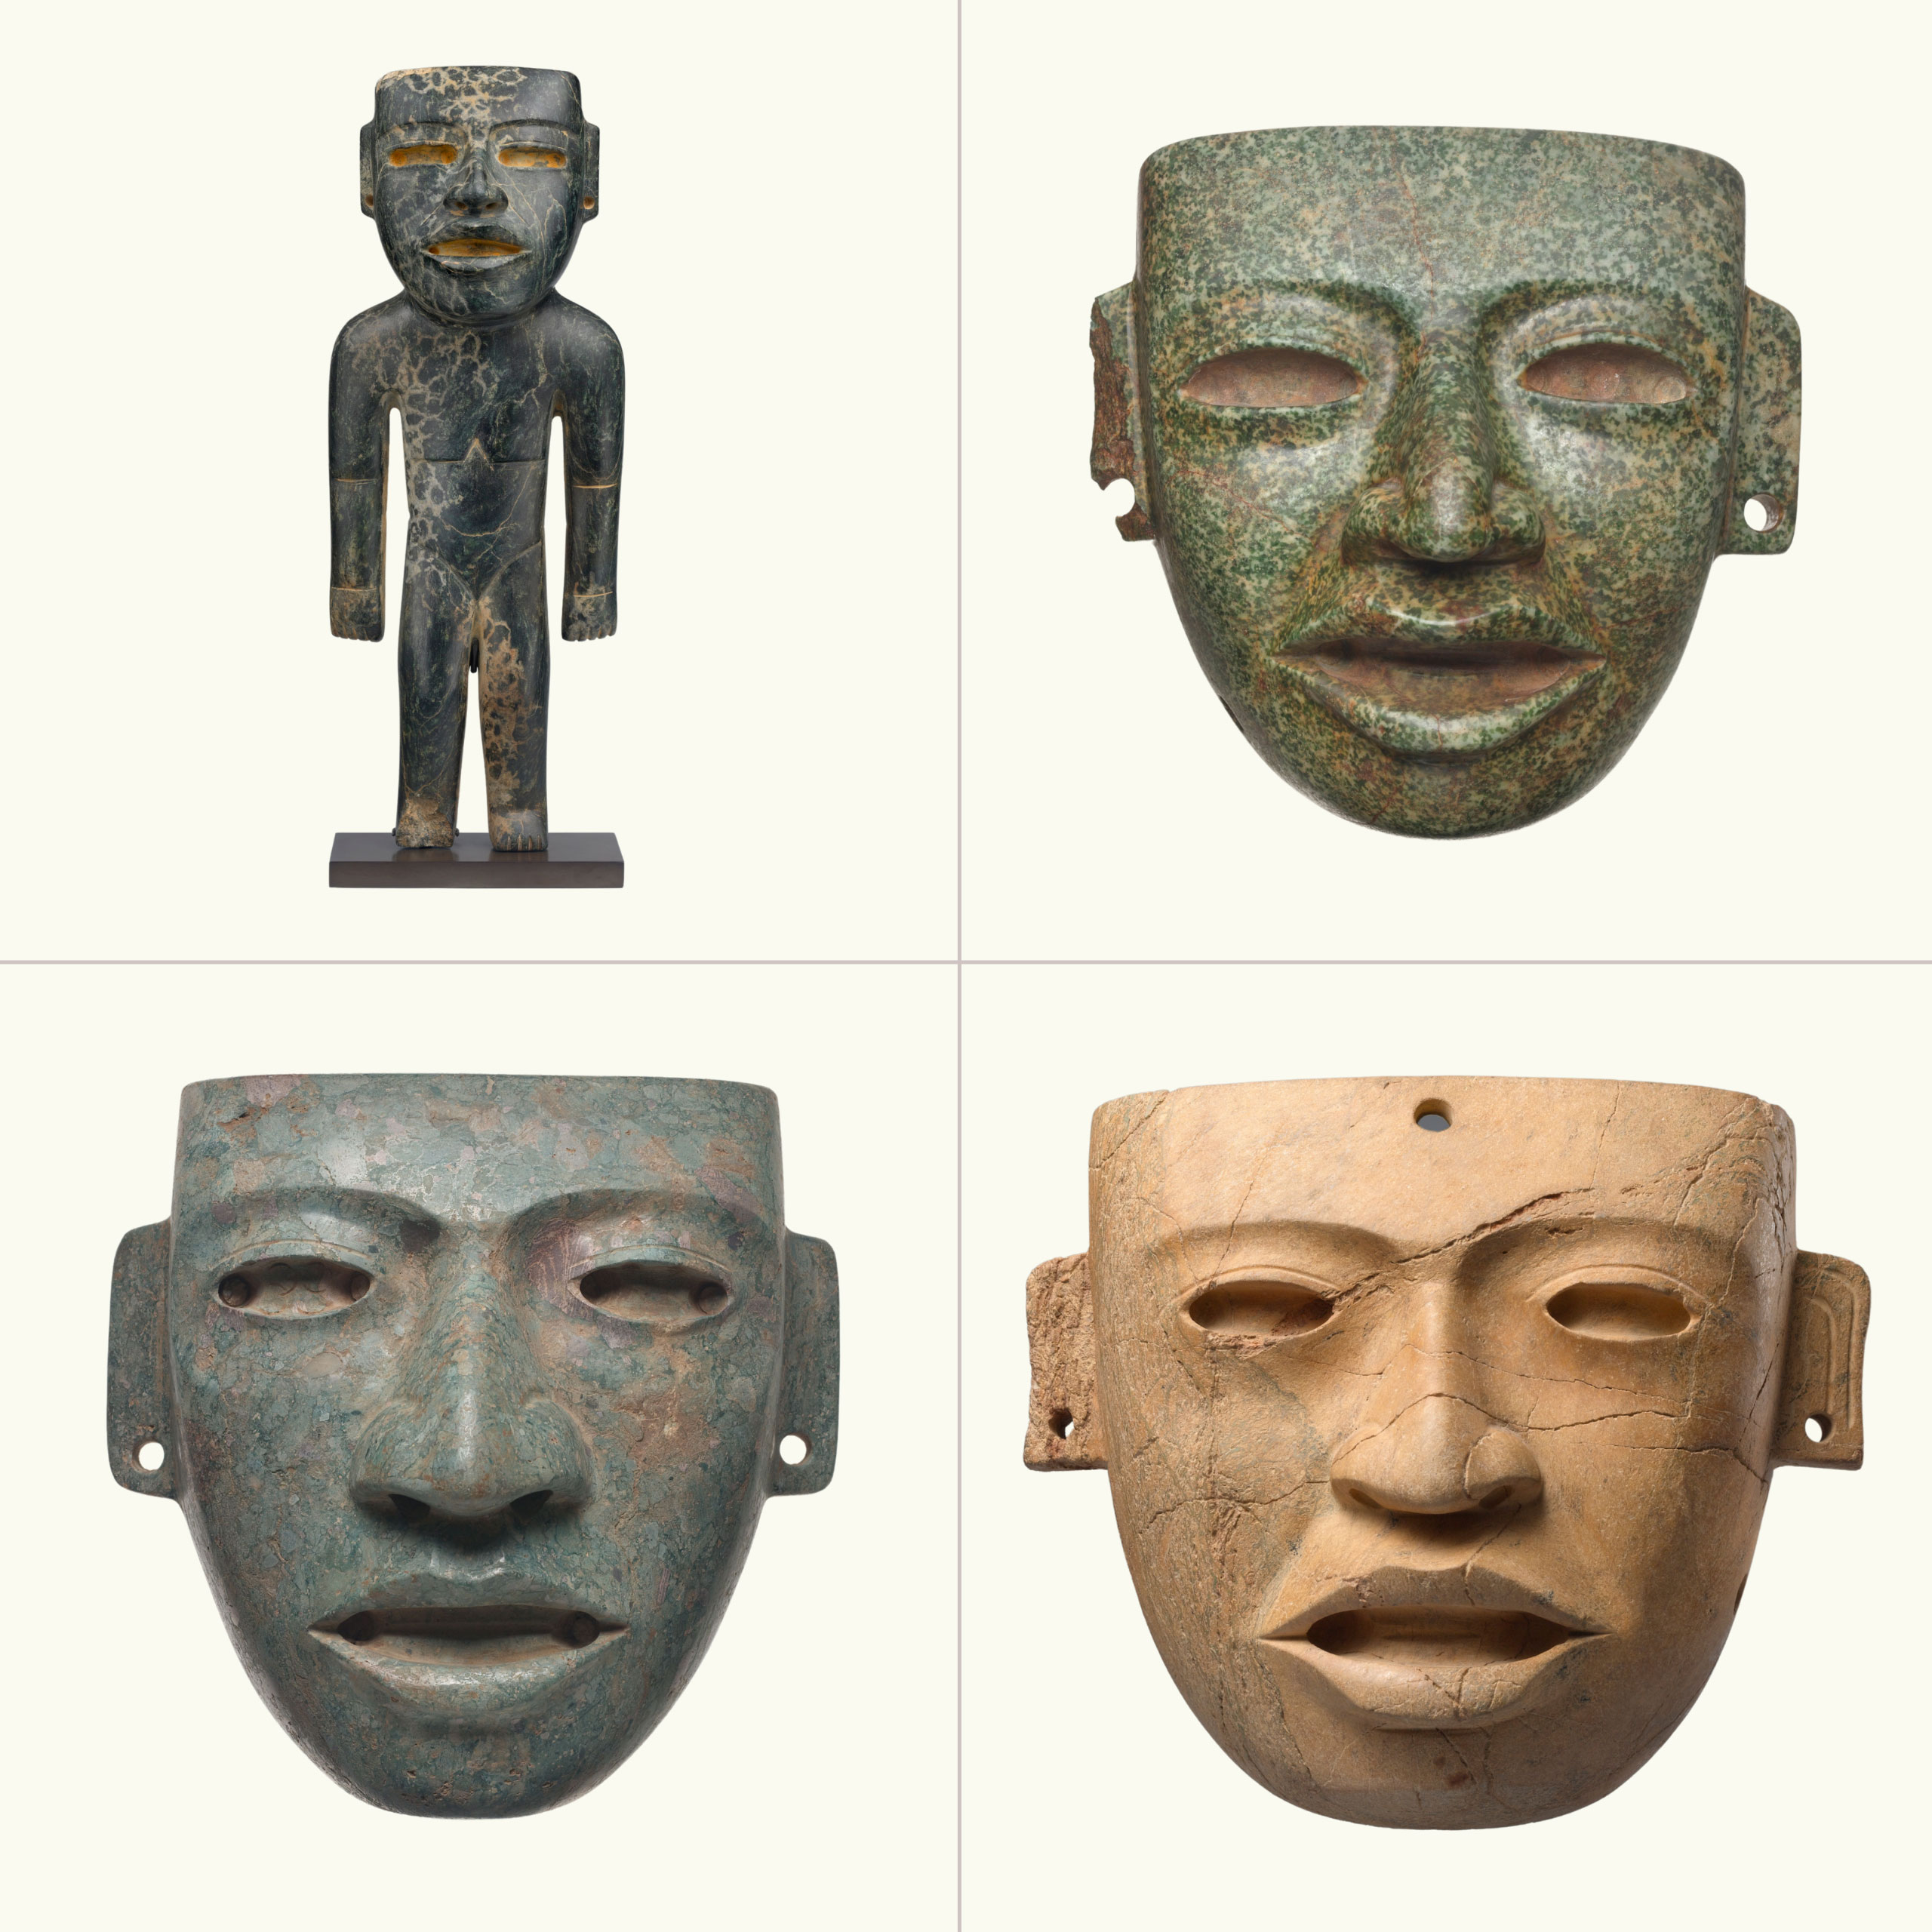 A comparison of four objects: 1. a green stone standing figure, 2. a mottled green jade mask, 3. a green stone mask with pronounced features, and 4. a light-brown stone mask.